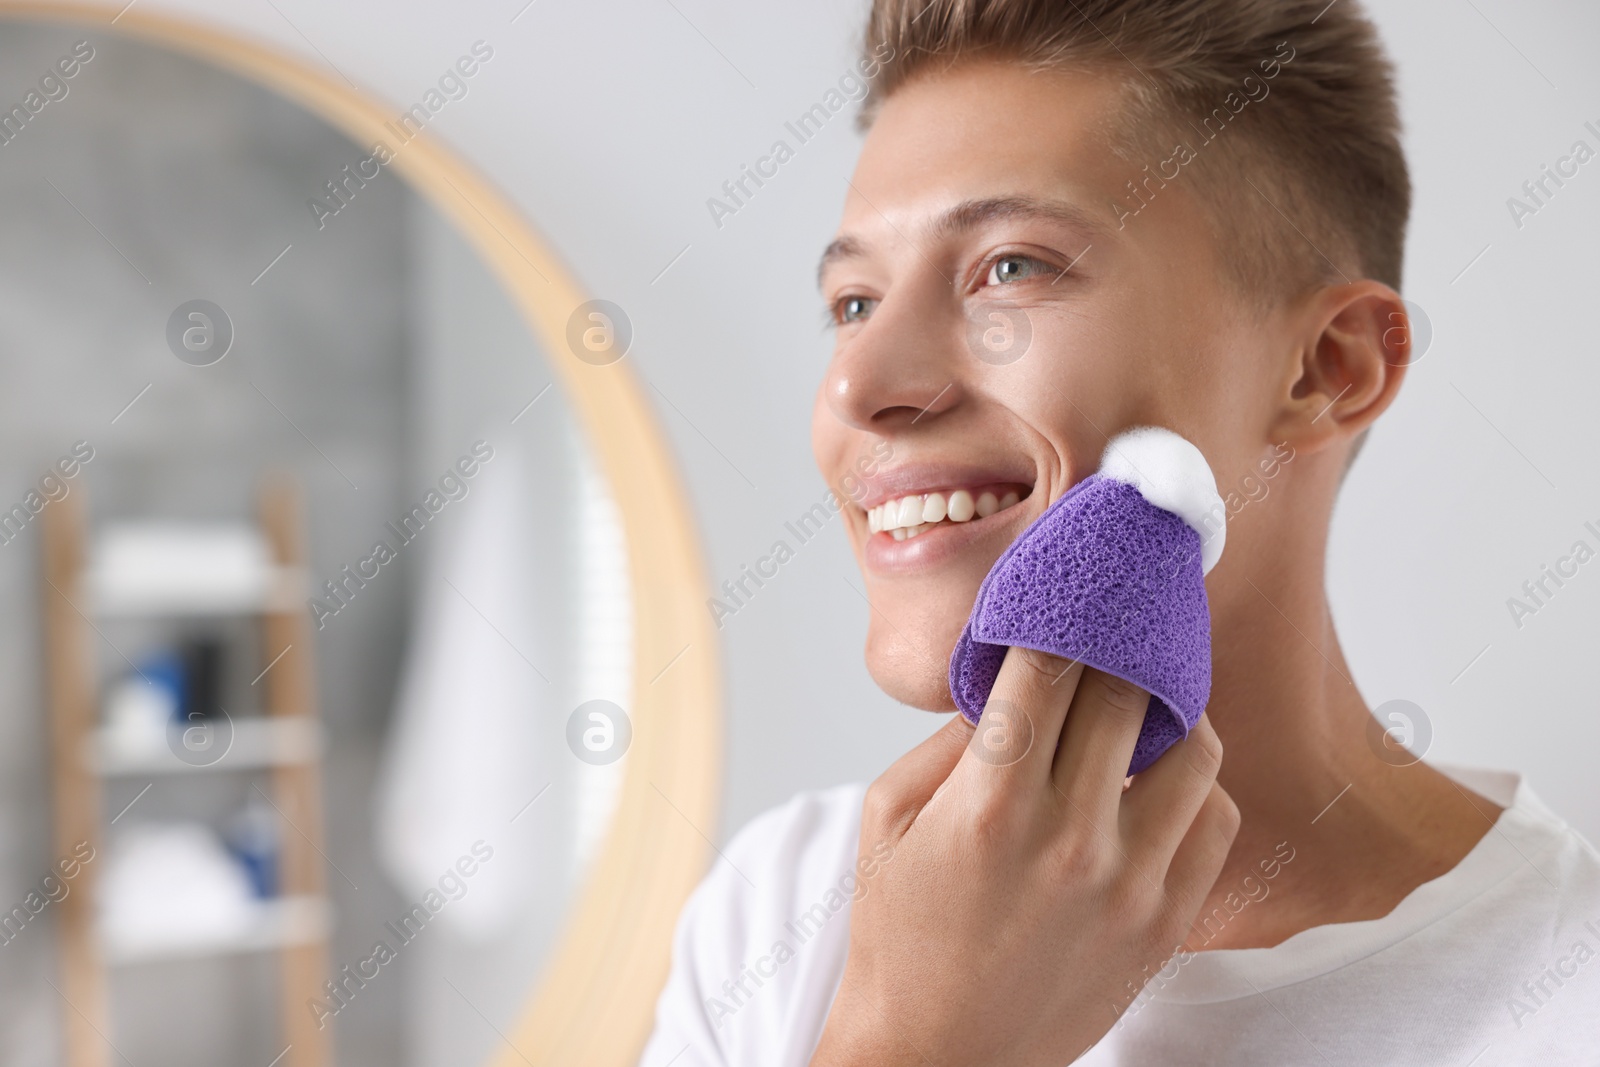 Photo of Happy young man washing his face with sponge in bathroom. Space for text